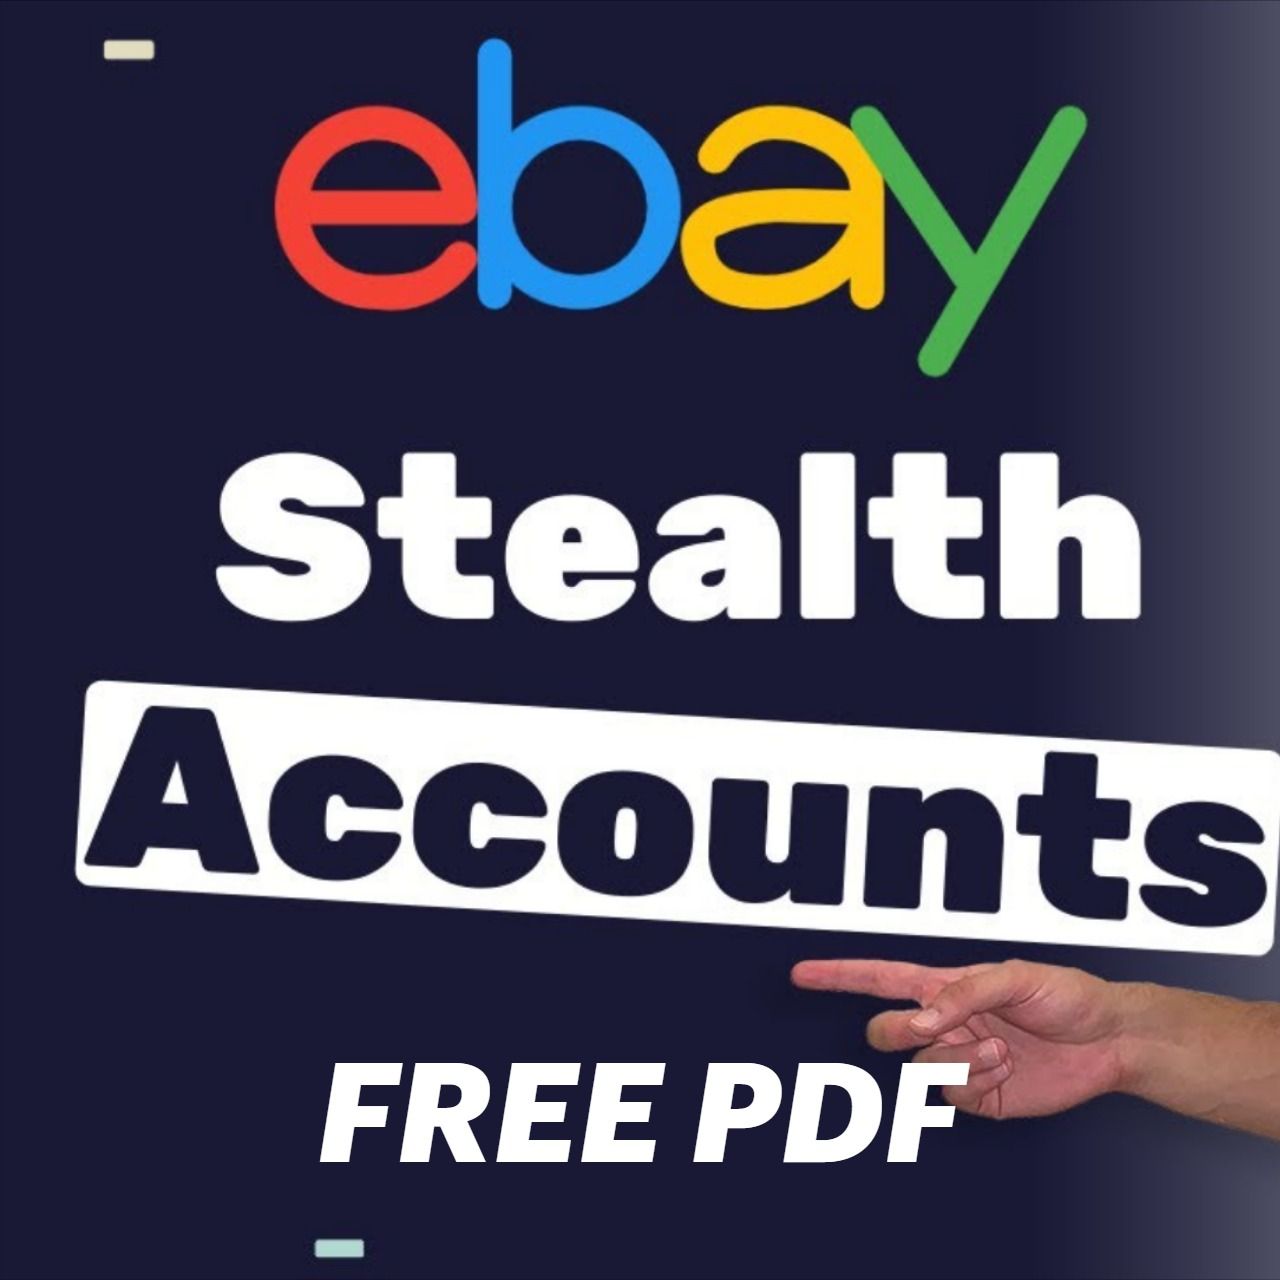 You can access accounts PayPal stealth whether you travel locally or internationally without being locked out